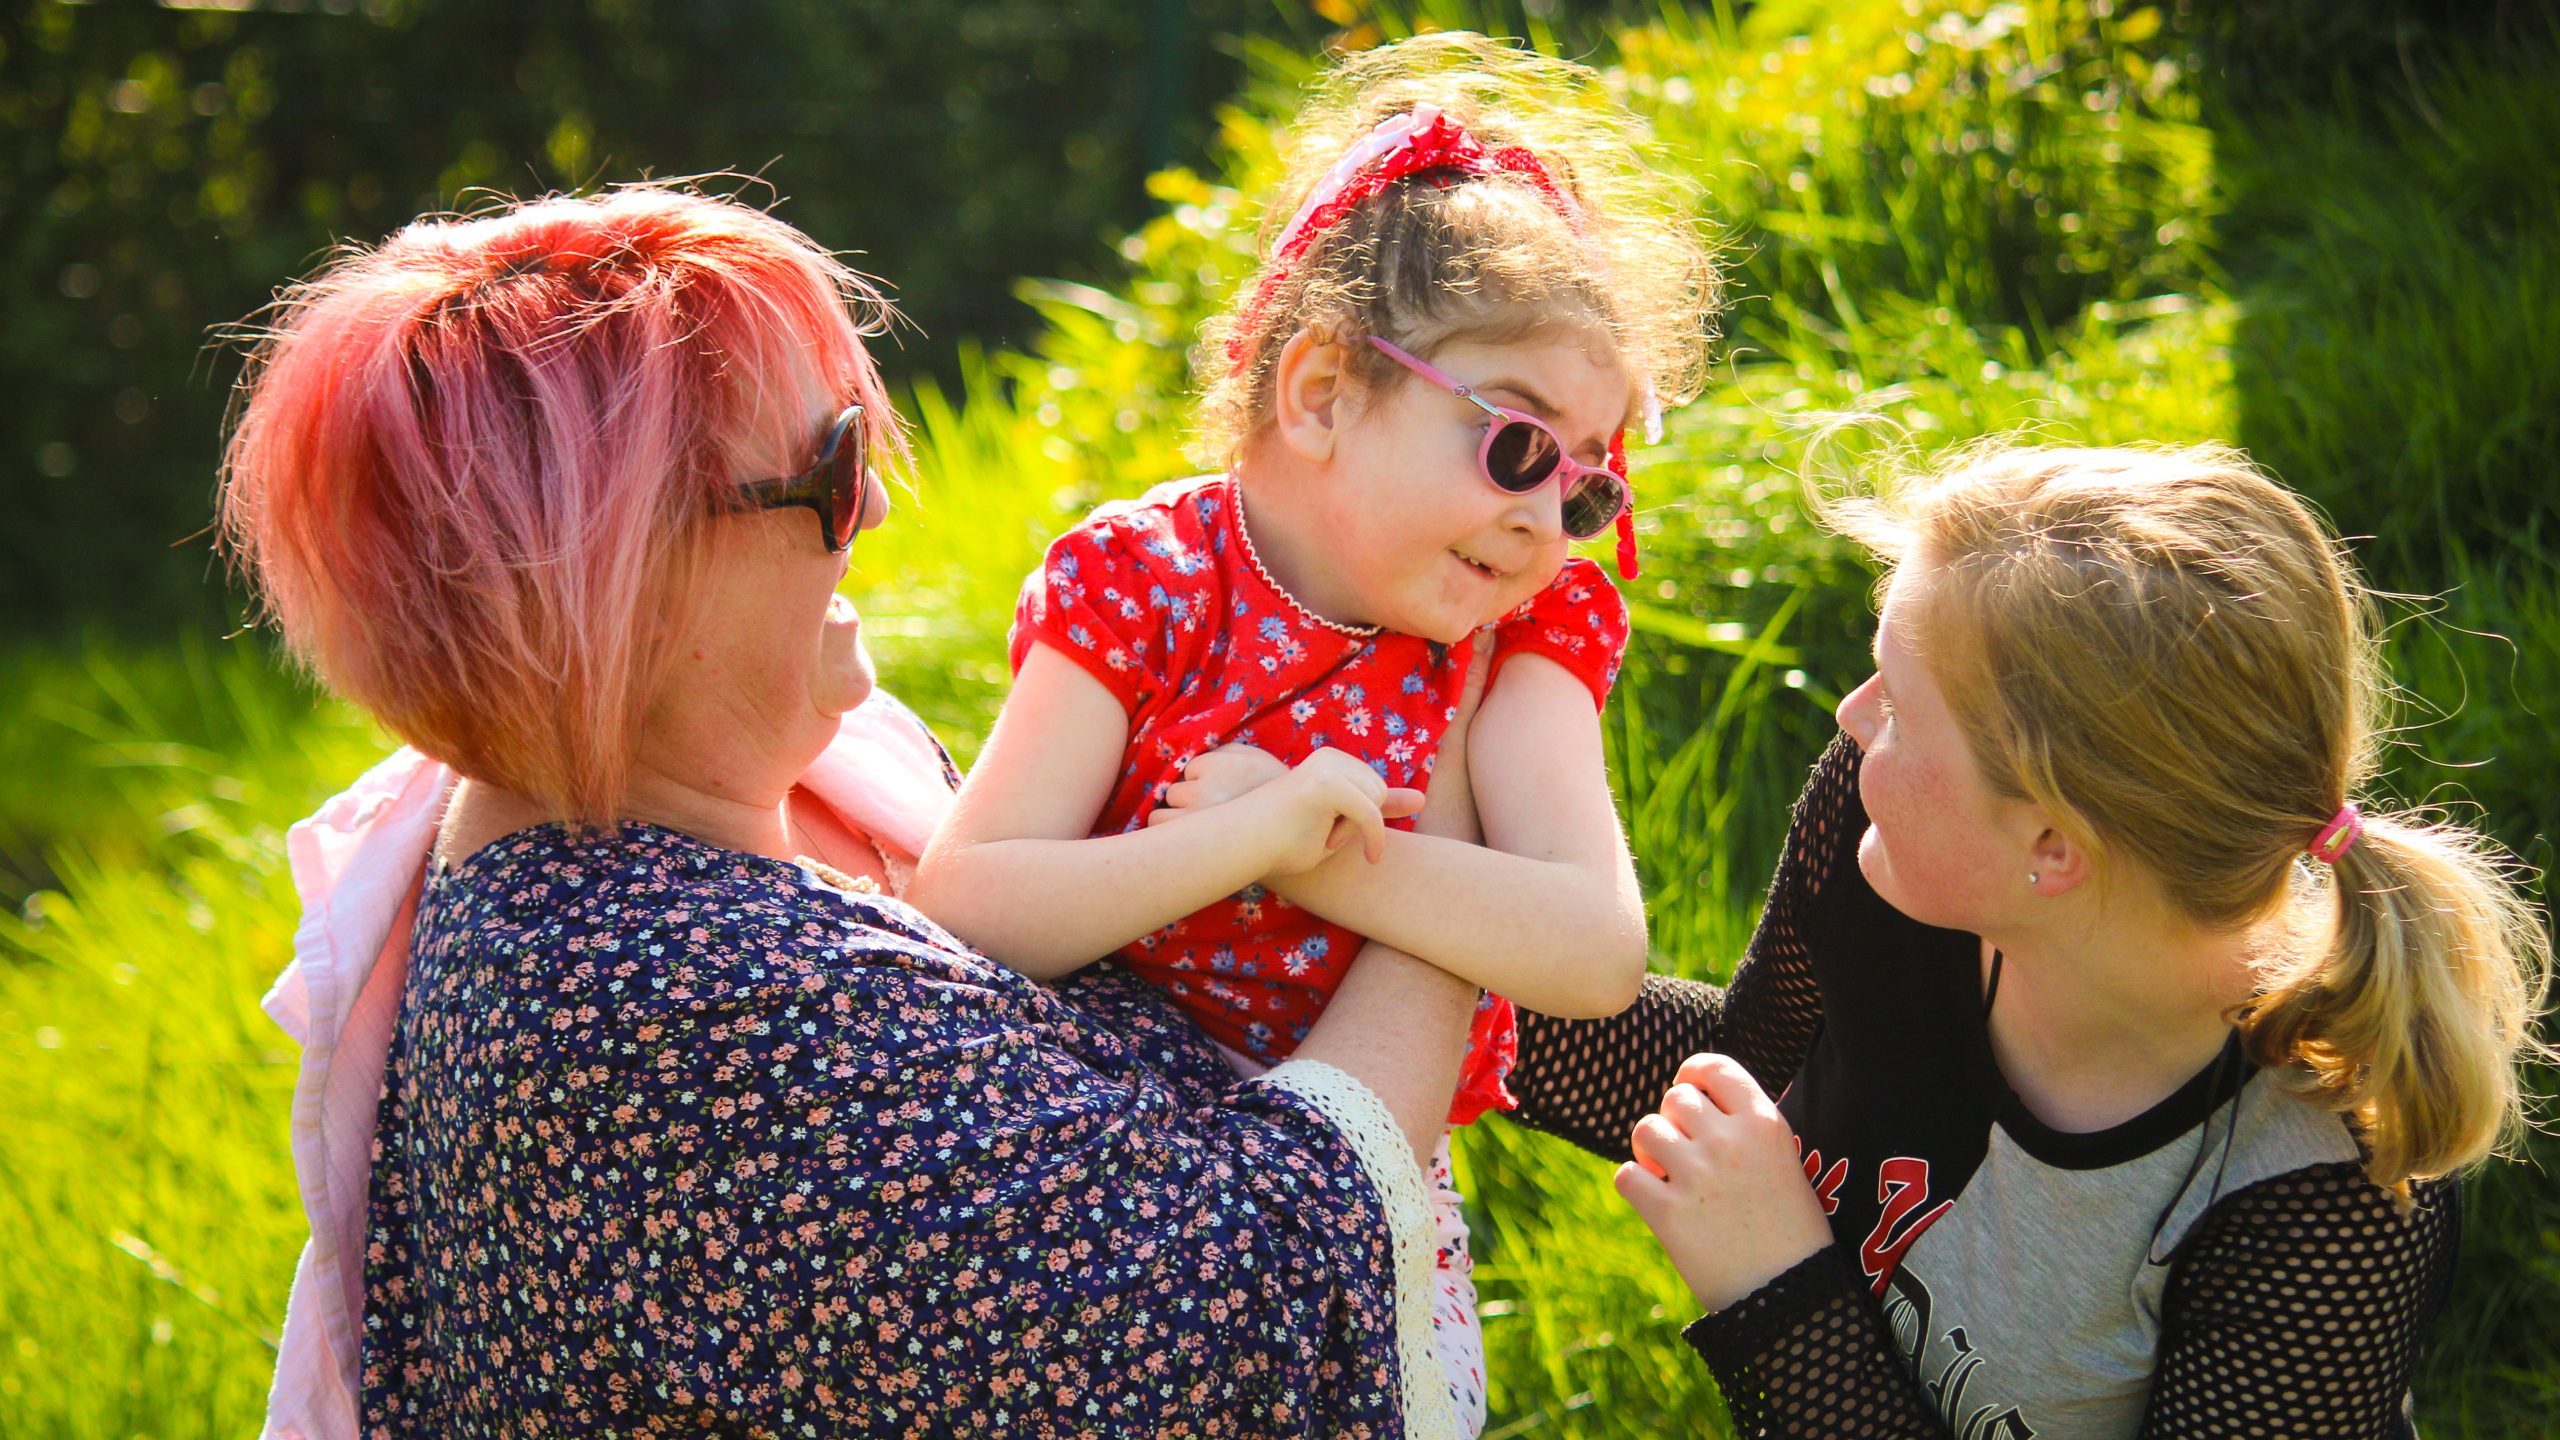 A family playing with each other. A mum is holding a child while another, slightly older, child stand beside playing with the girl in her mums arms. They all look amongst each other on a bright sunny day.